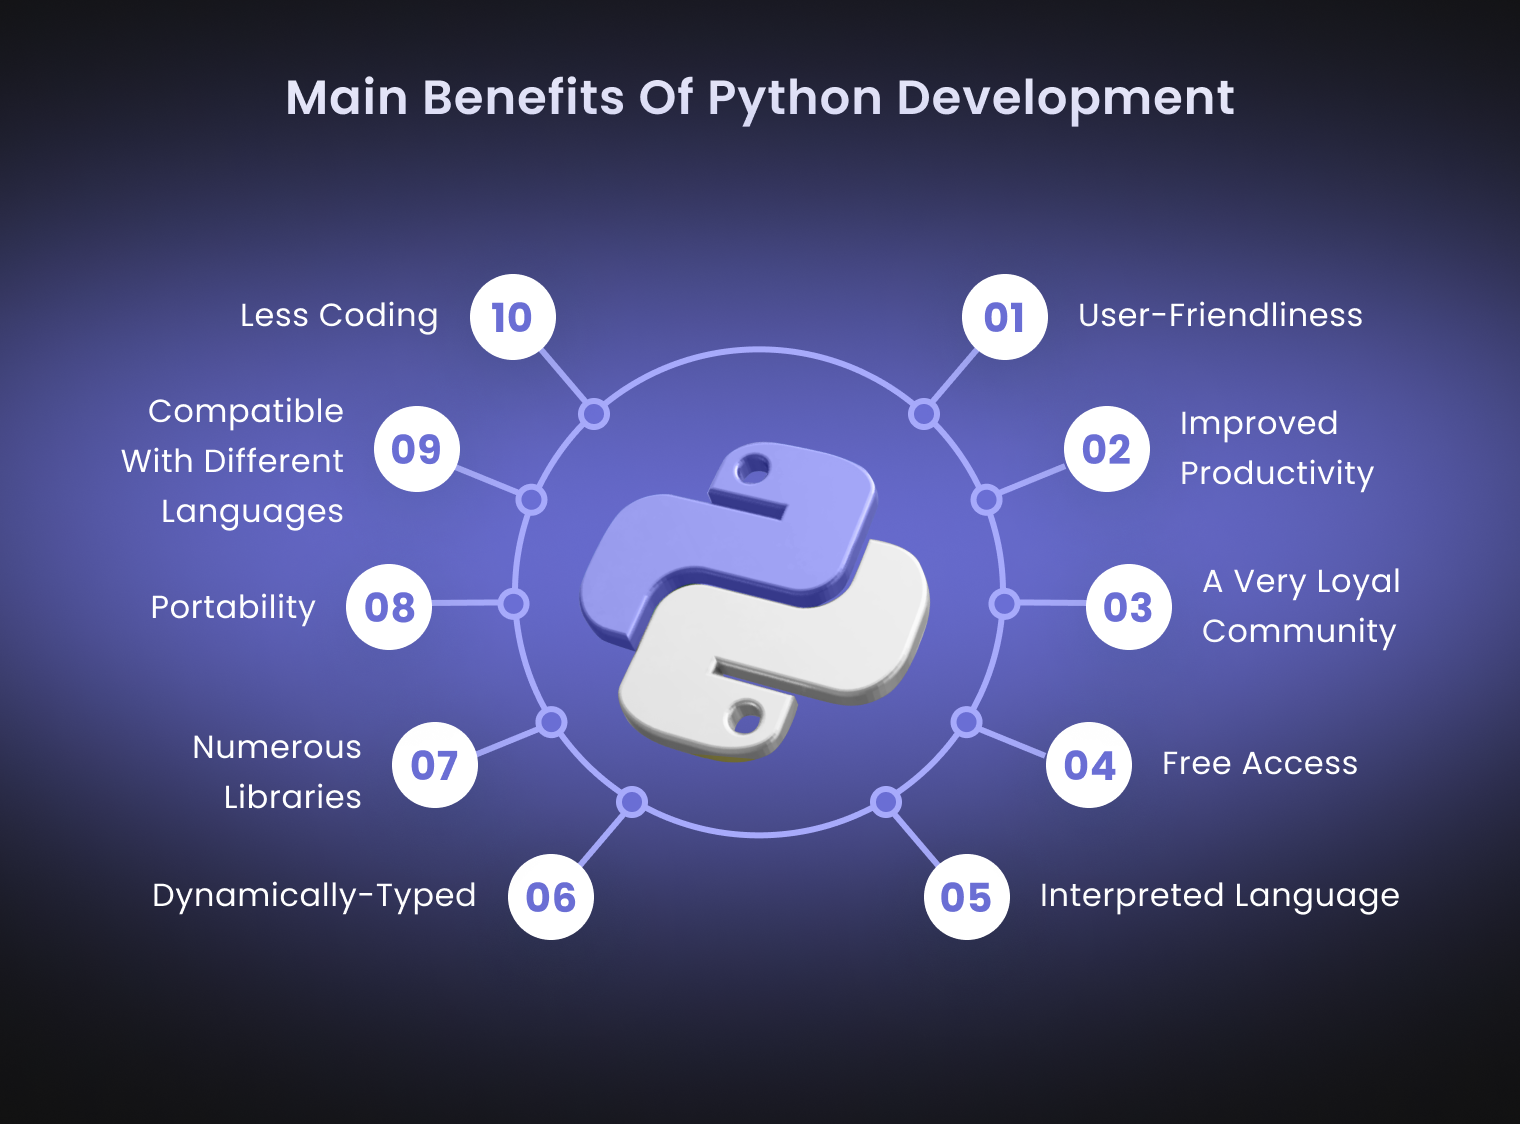 Python for Business – Use Cases and Main Benefits - 6